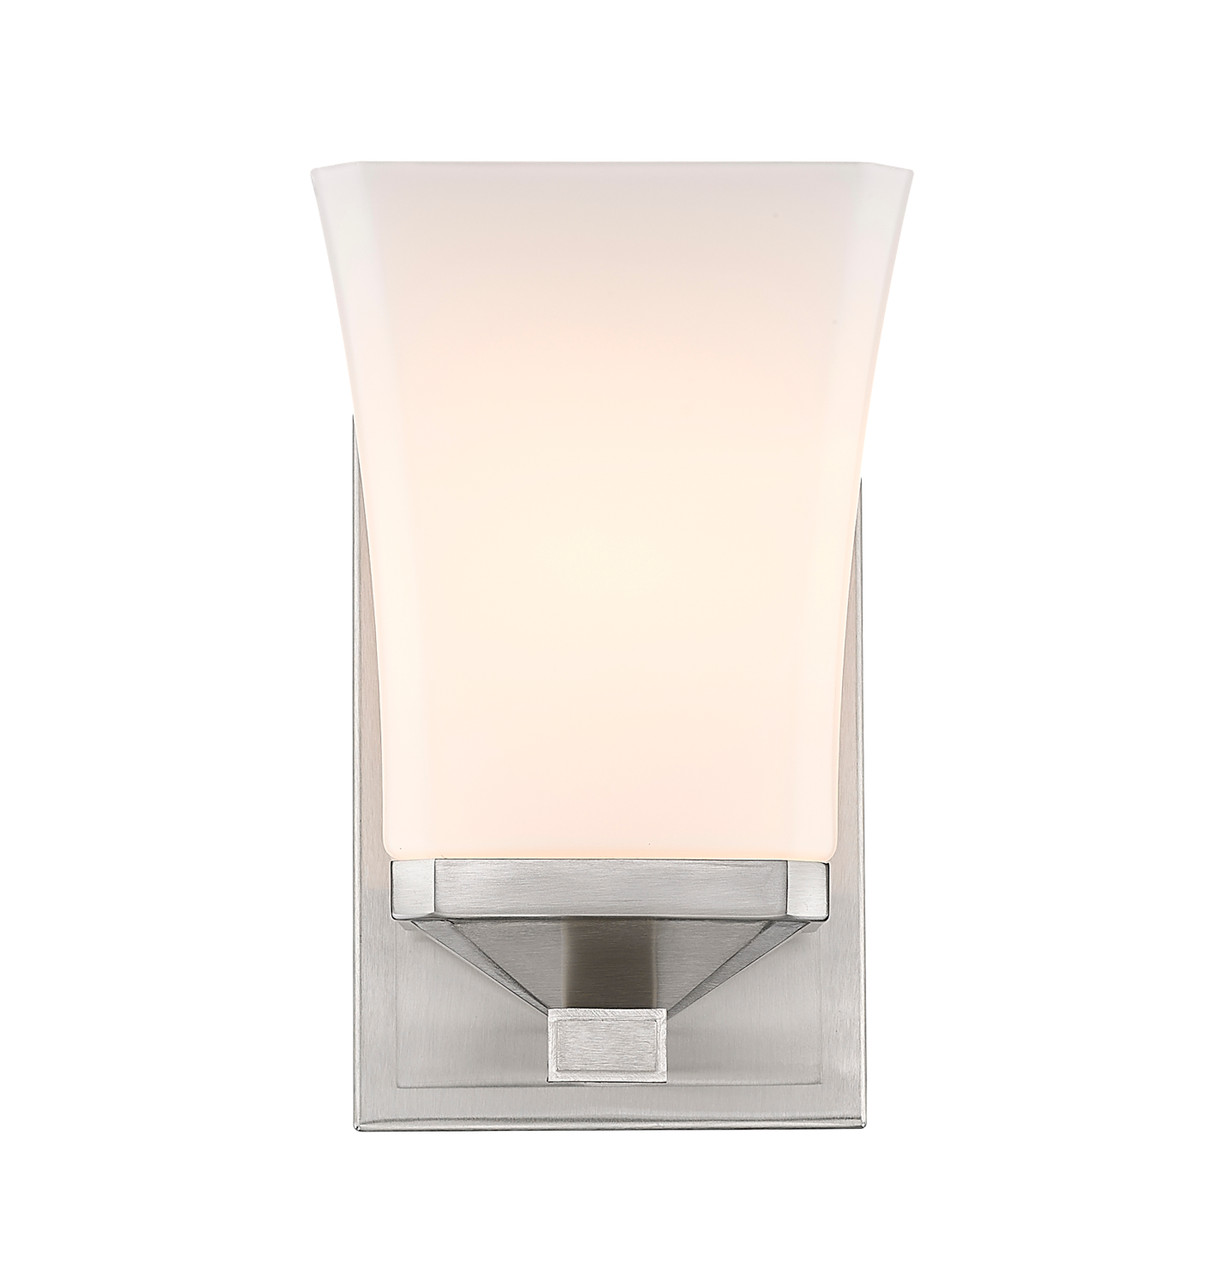 Z-LITE 1939-1S-BN 1 Light Wall Sconce, Brushed Nickel